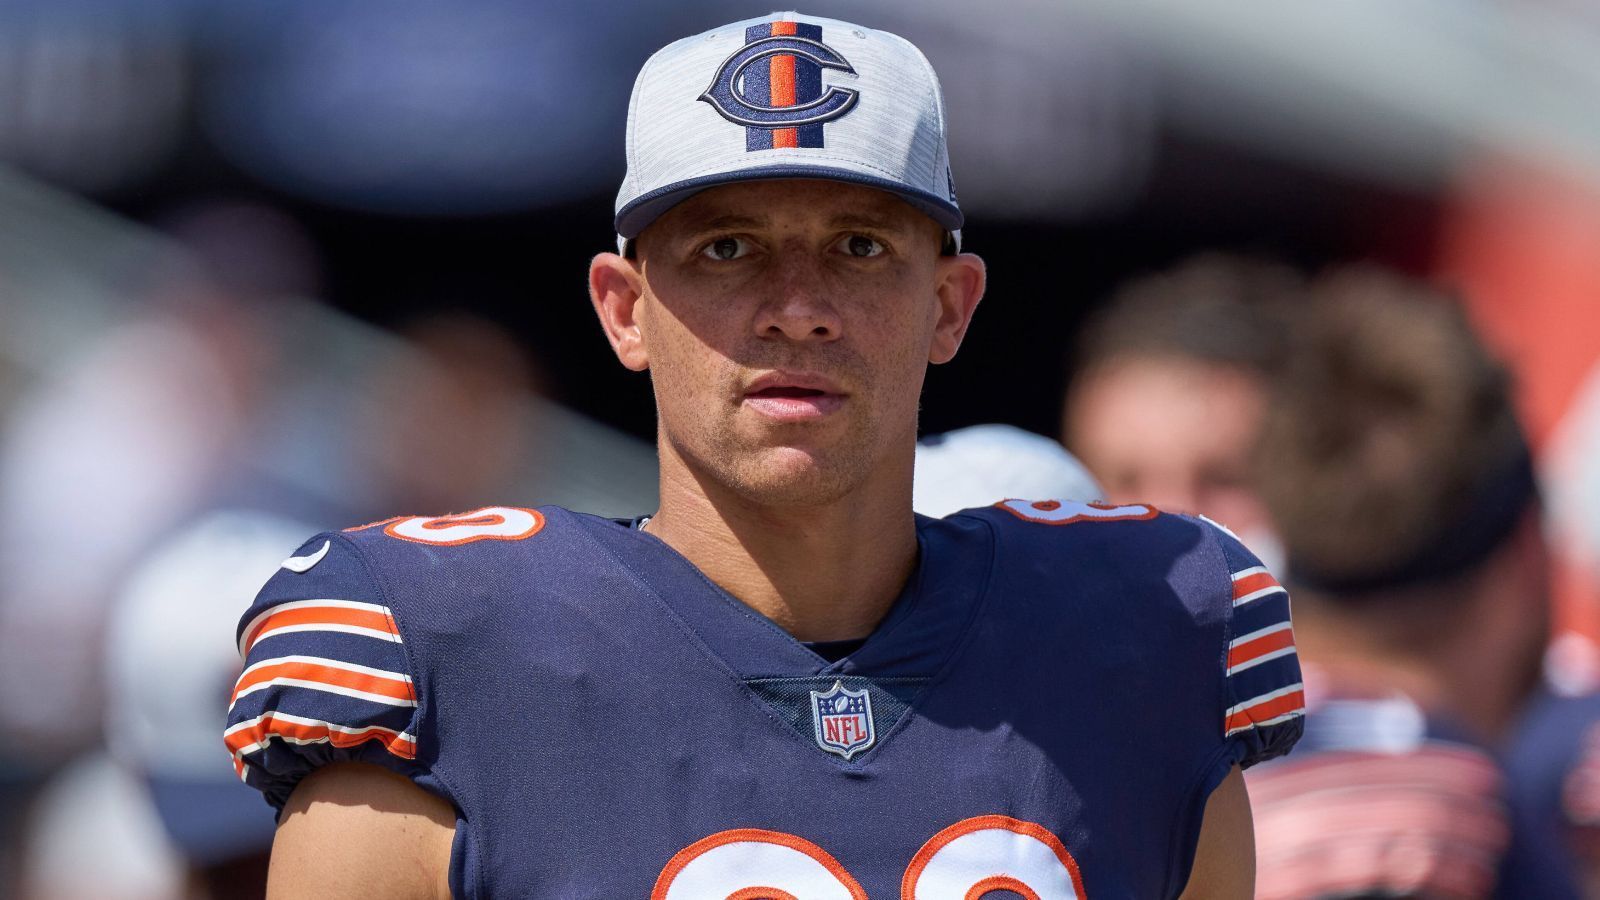 
                <strong>Jimmy Graham</strong><br>
                Team: Chicago Bears -Position: Tight End 
              